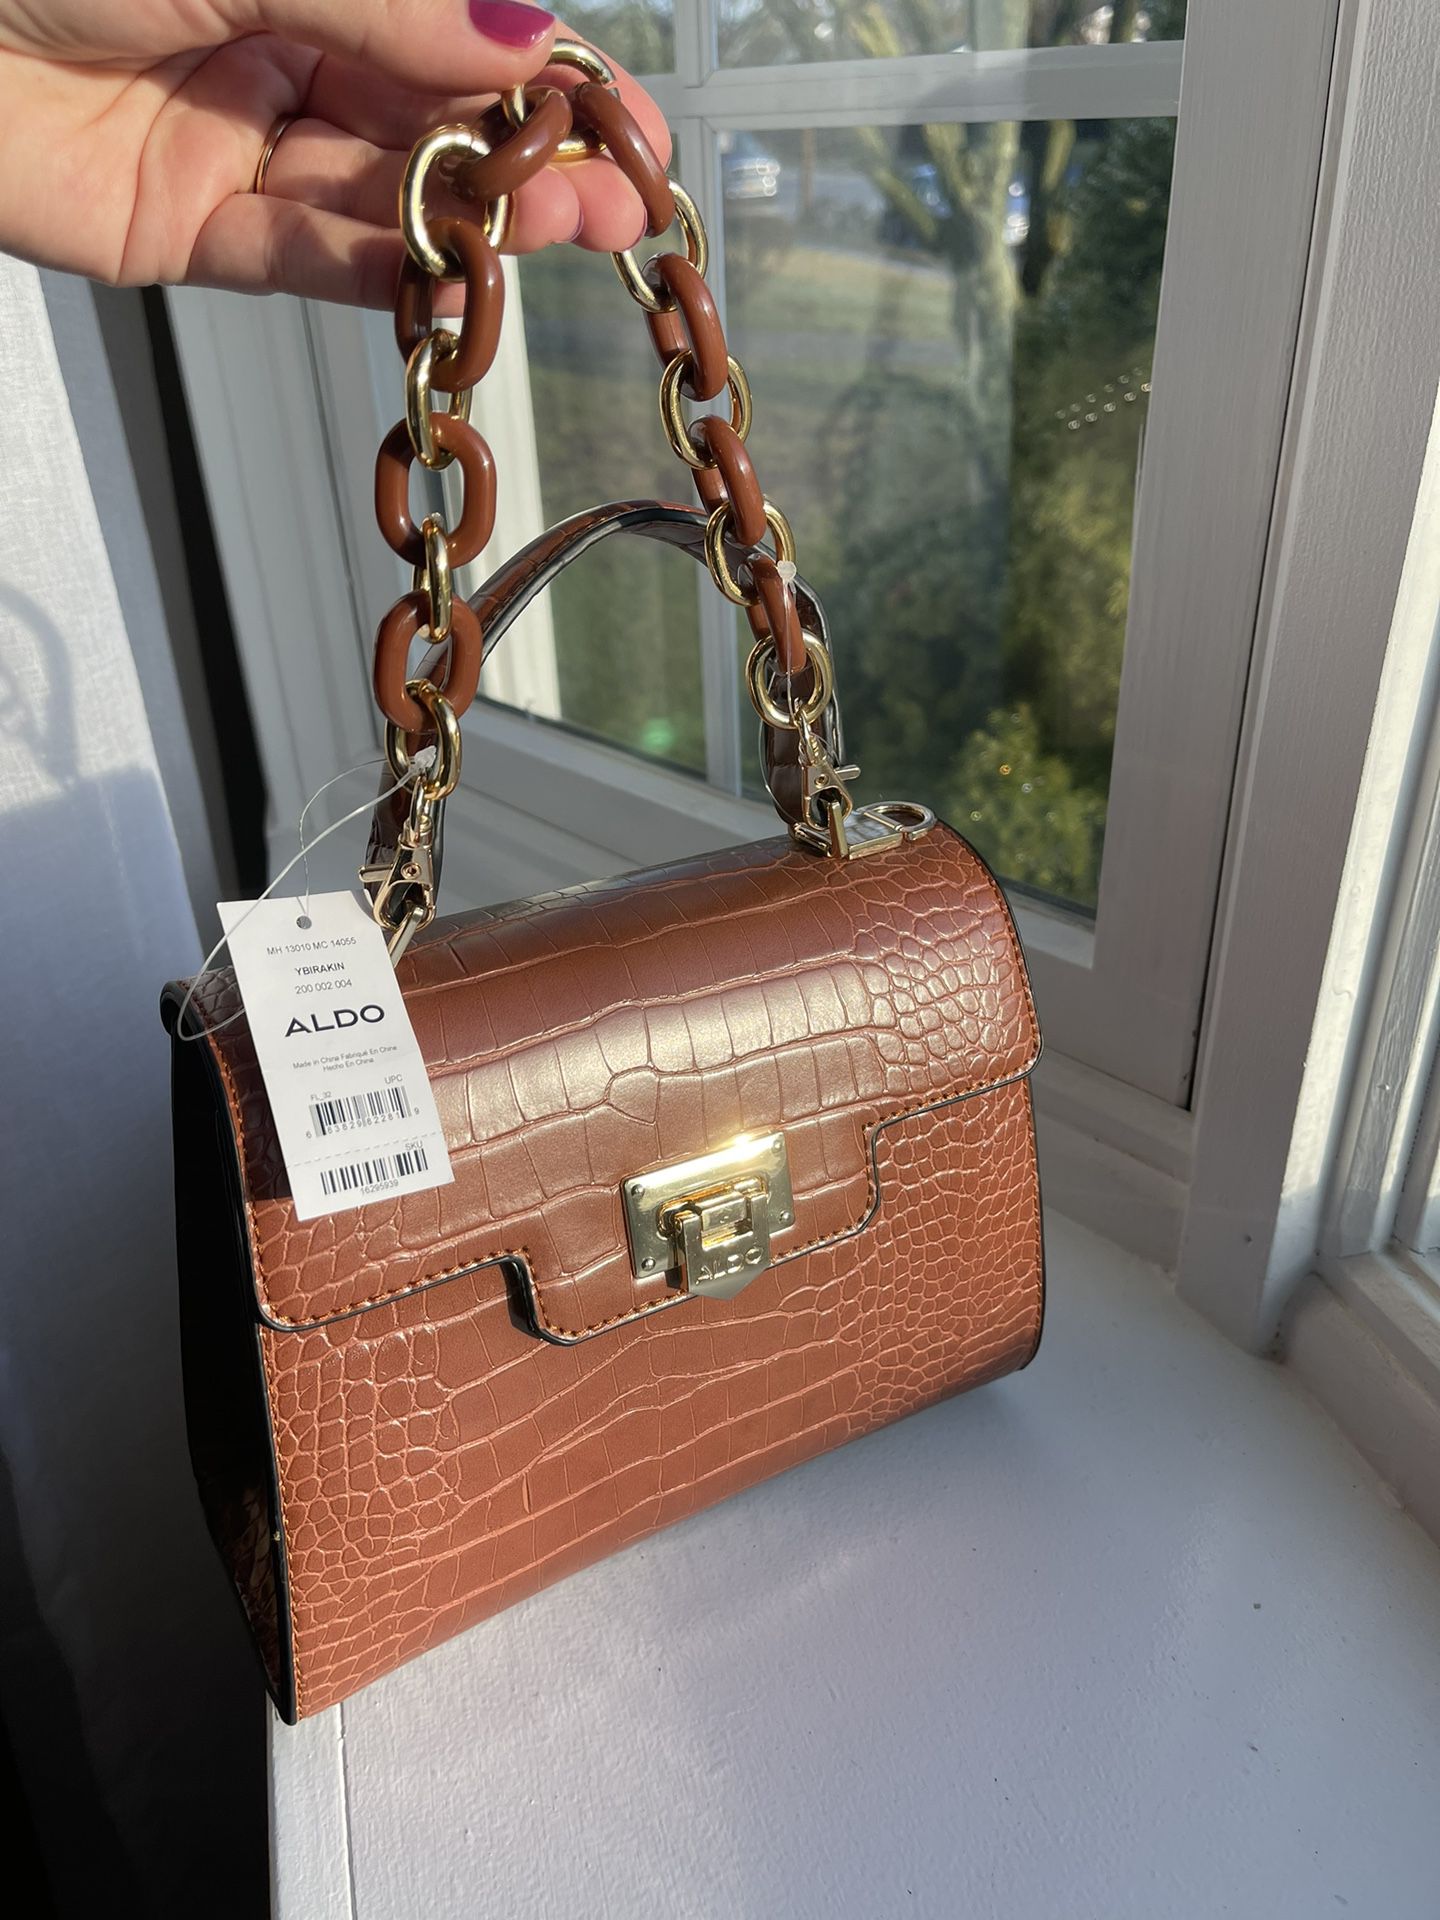 Ted Baker Bag - Price Is Negotiable for Sale in West Babylon, NY - OfferUp